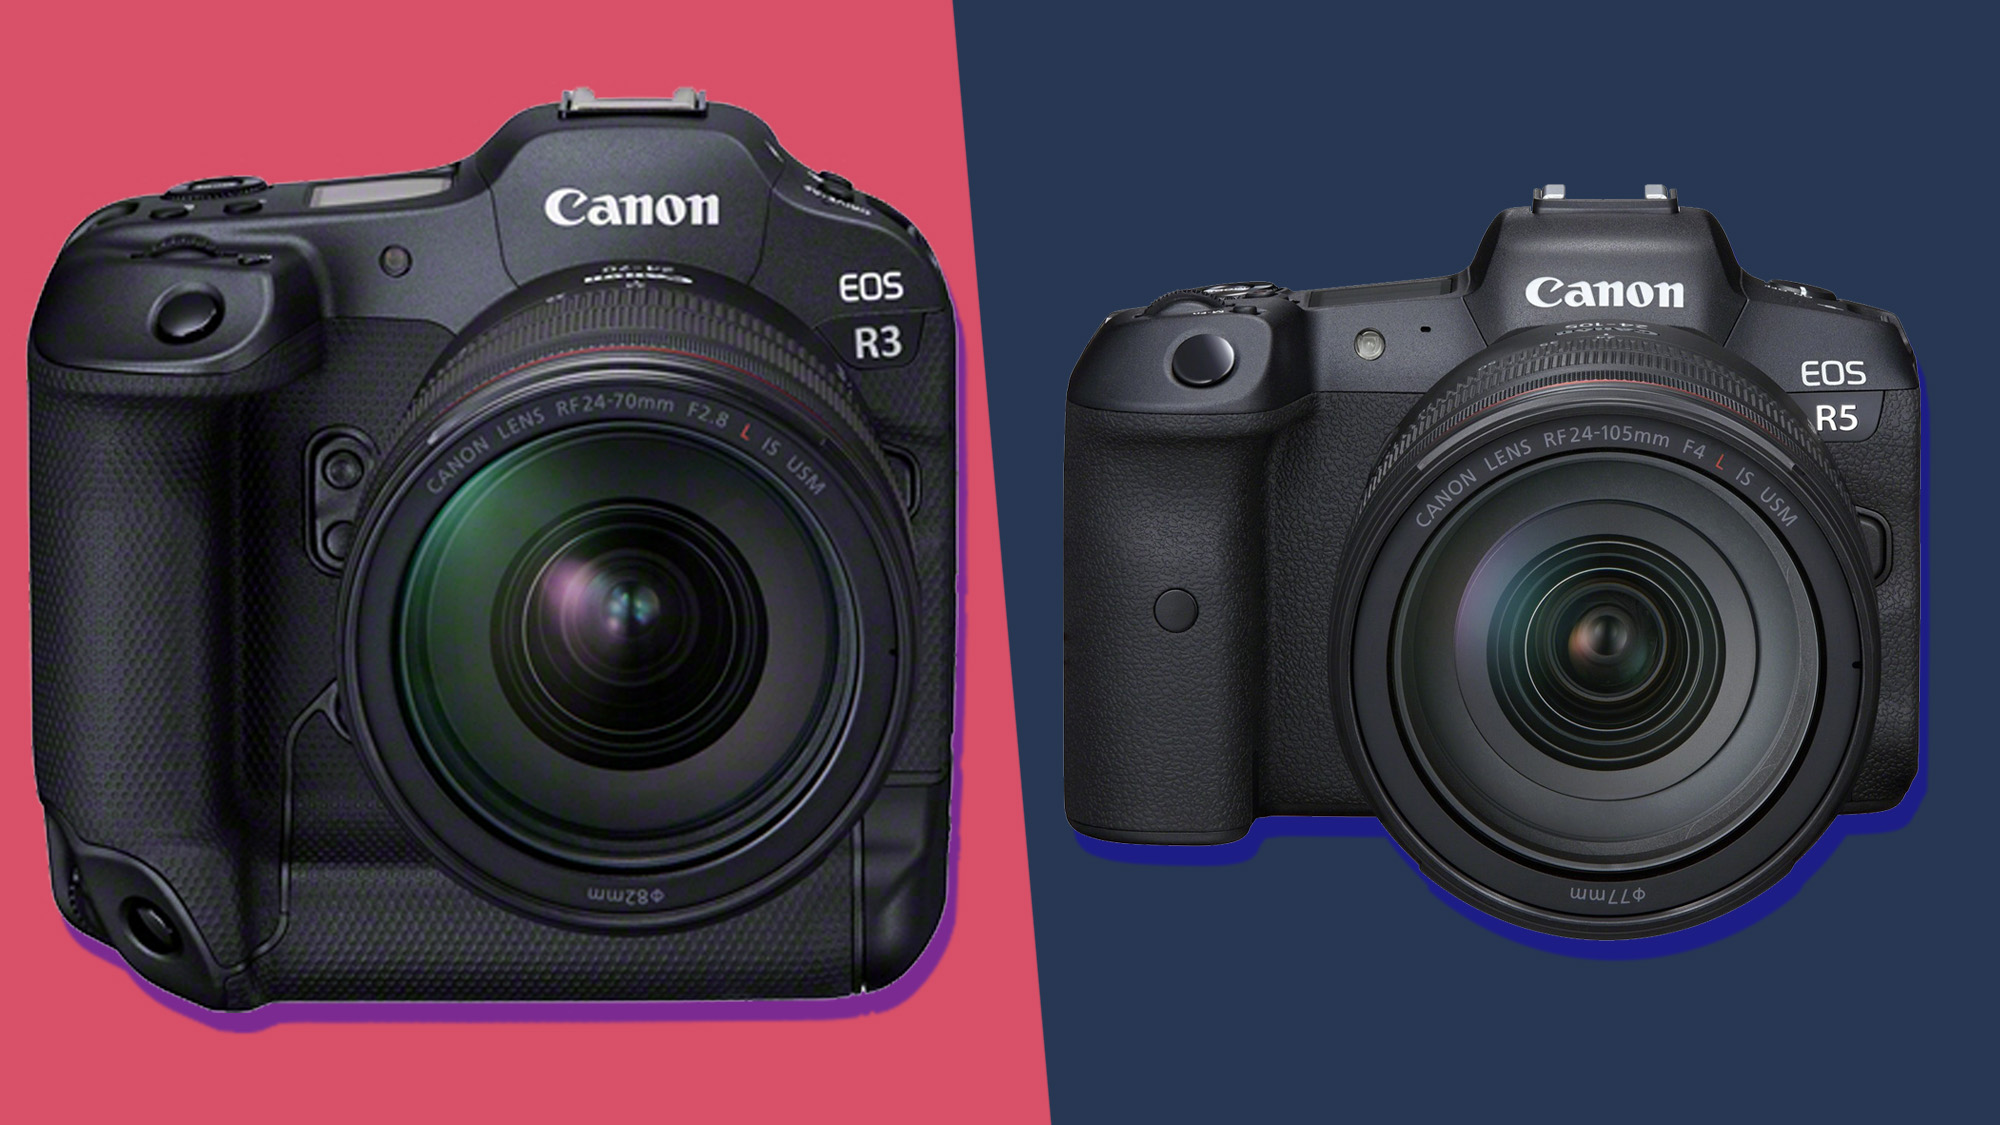 Looking to Buy The Canon EOS R5. See How It Stacks Up Nearby Before Deciding